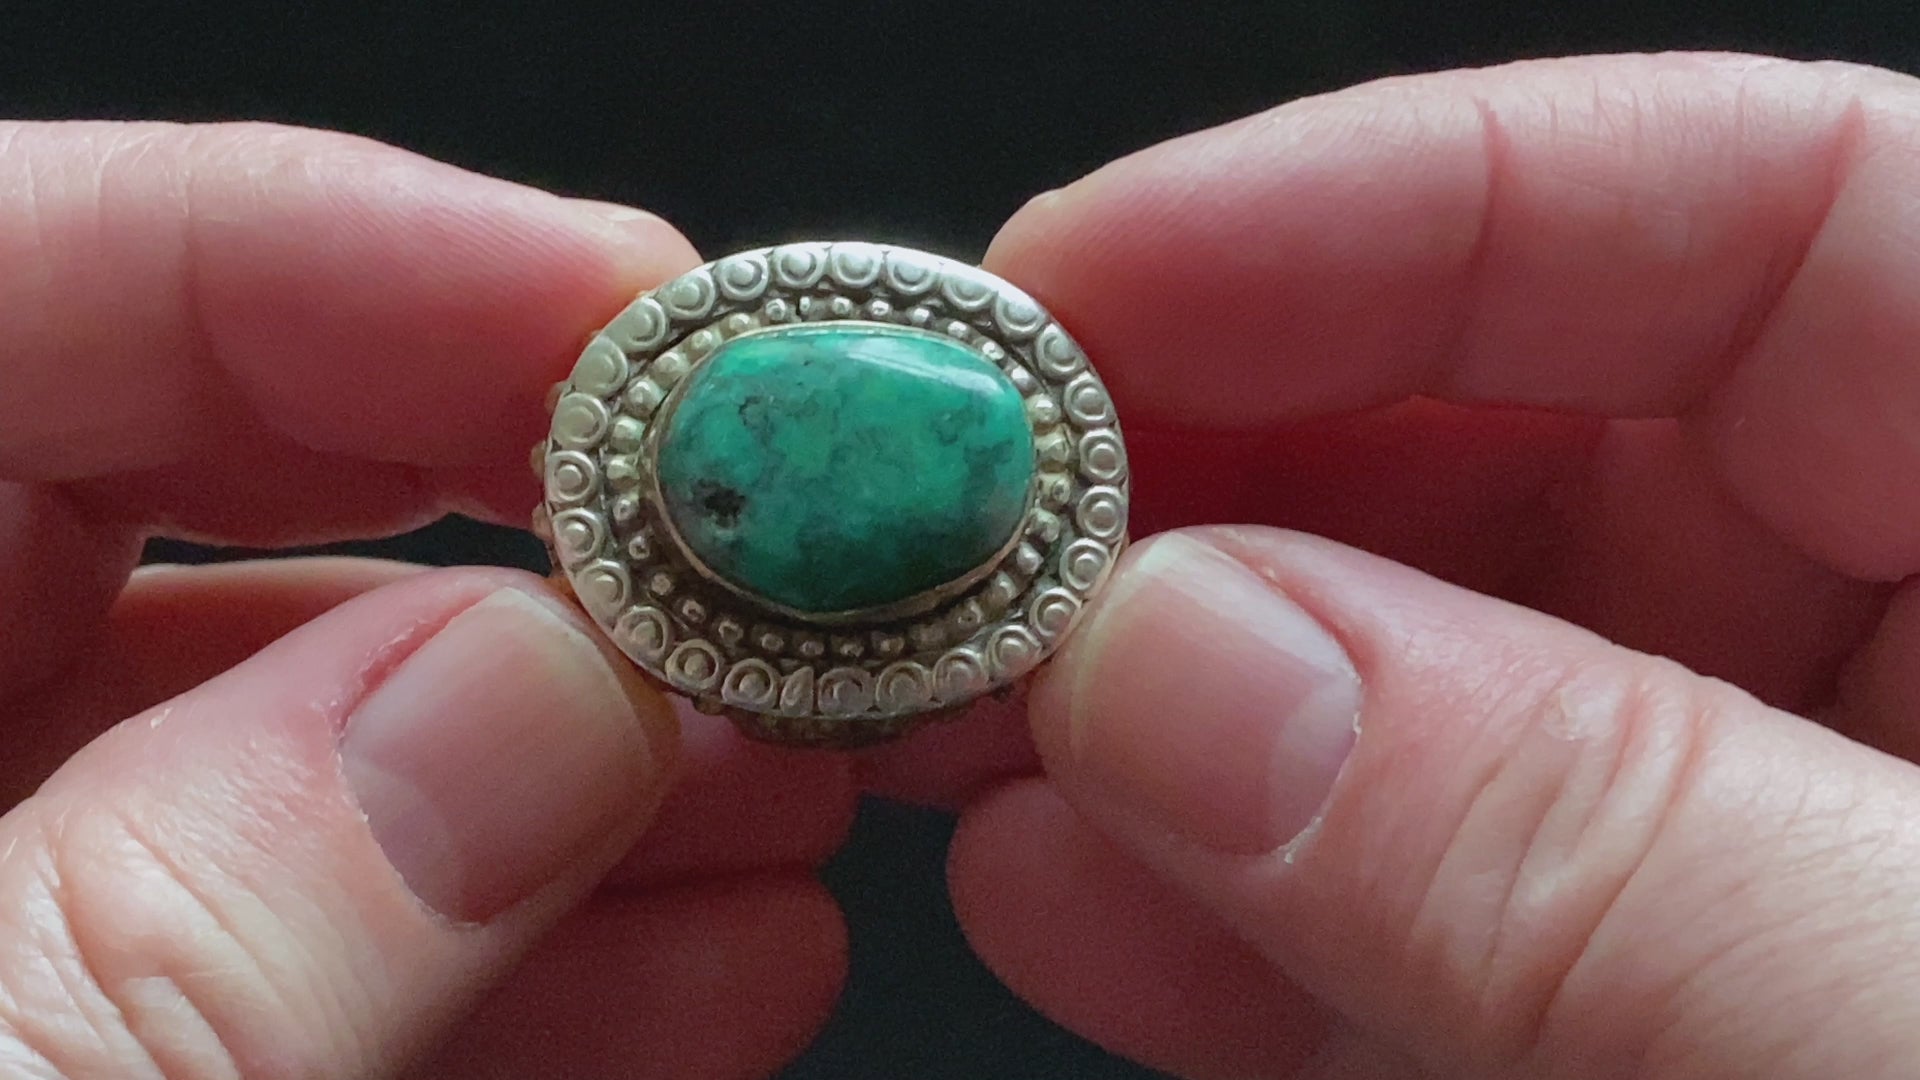 Silver And Turquoise Ring From Afghanistan | Vintage Ethnic Jewellery